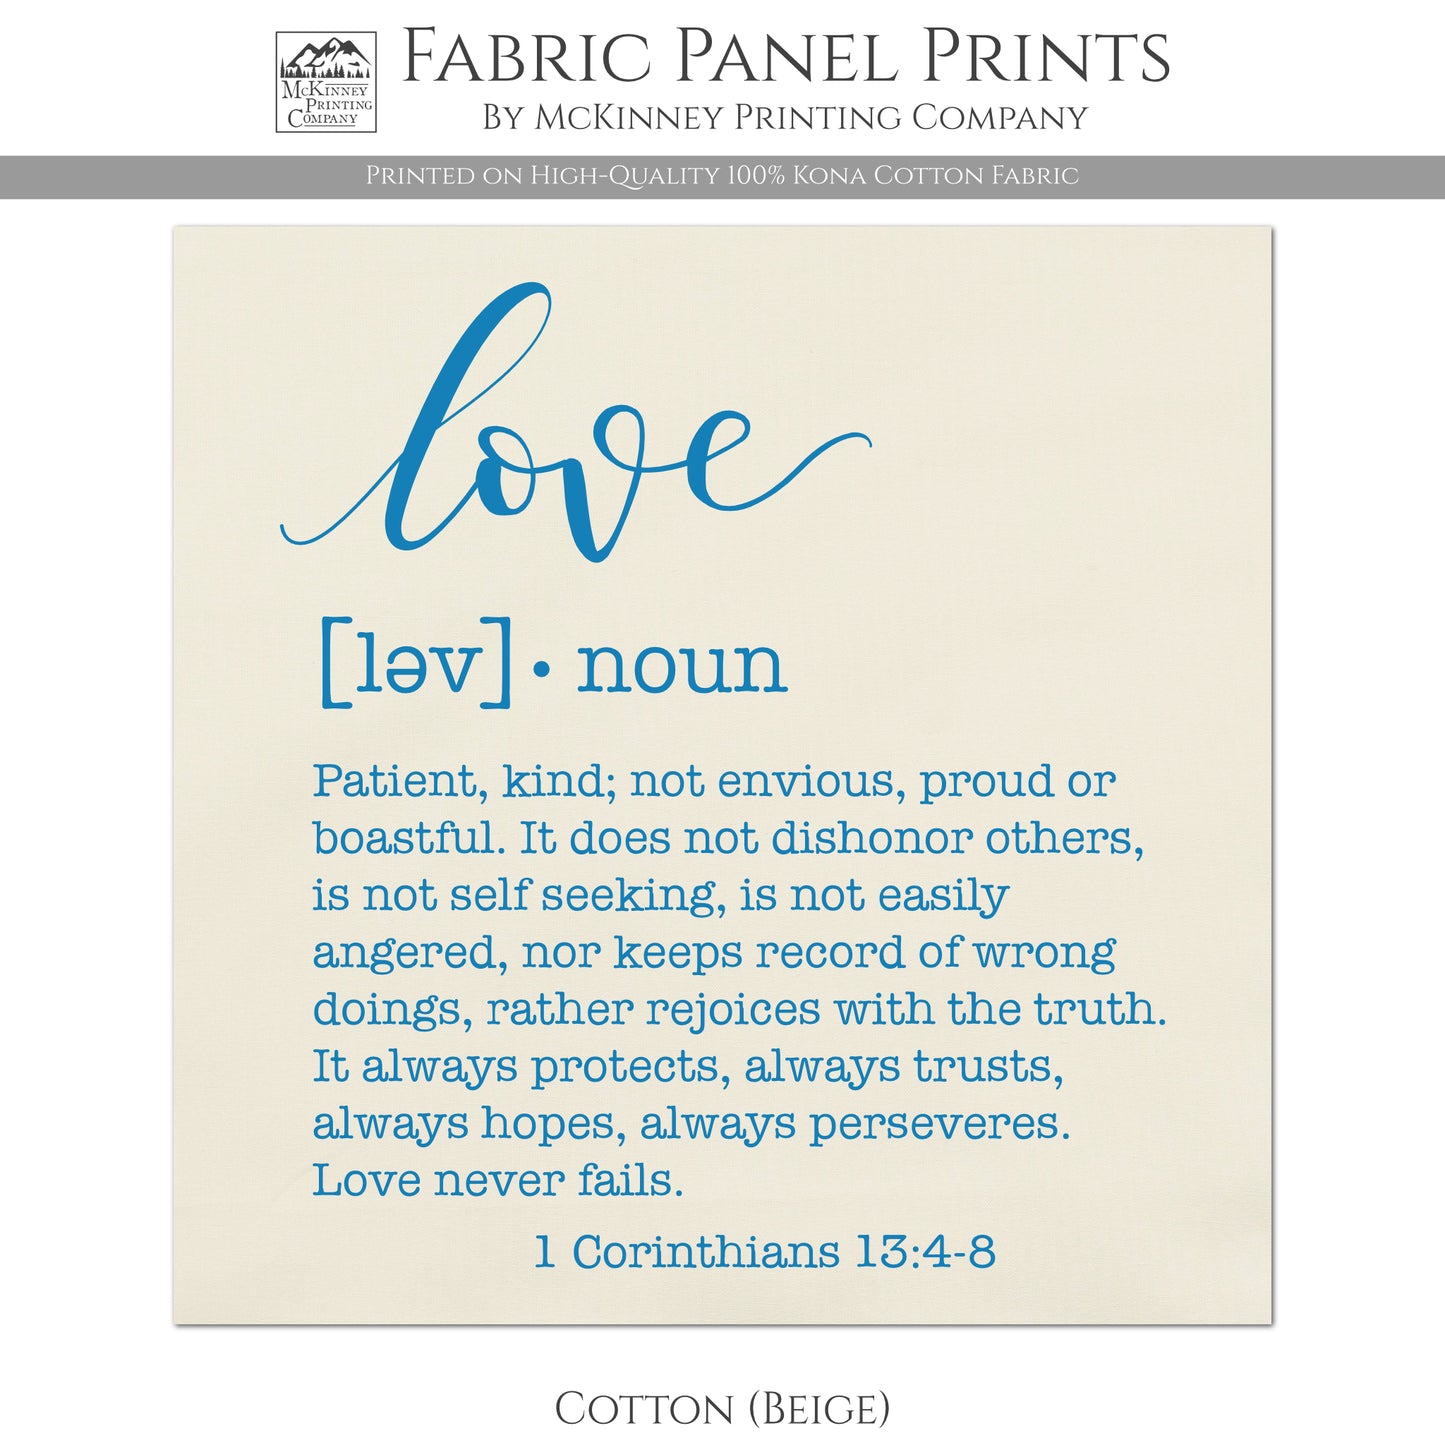 Love Fabric, Patient, kind, not envious, proud or boastful. It does not dishonor others, is not self seeking, is not easily angered, nor keeps record of wrong doings, rather rejoices with the truth. It always protects, always trusts, always hopes, always perseveres. Love never fails. - 1 Corinthians 13:4-8 - Cotton